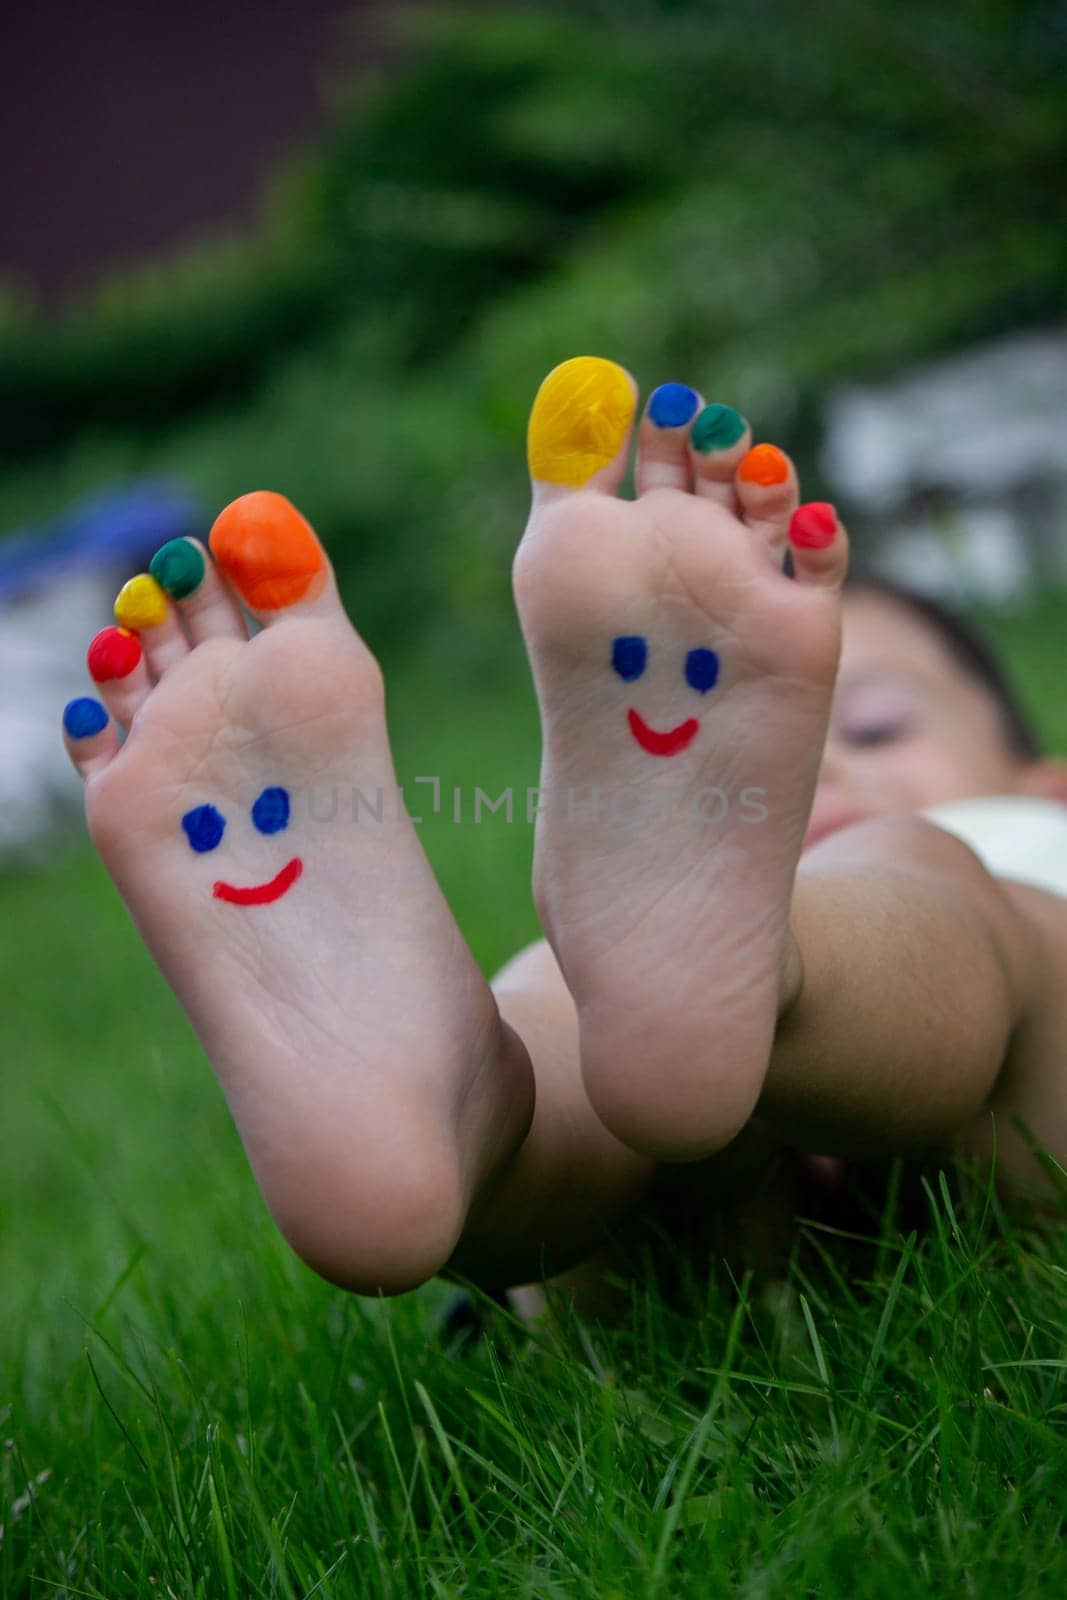 Children's legs with a pattern made of paints are smiling on the green grass.